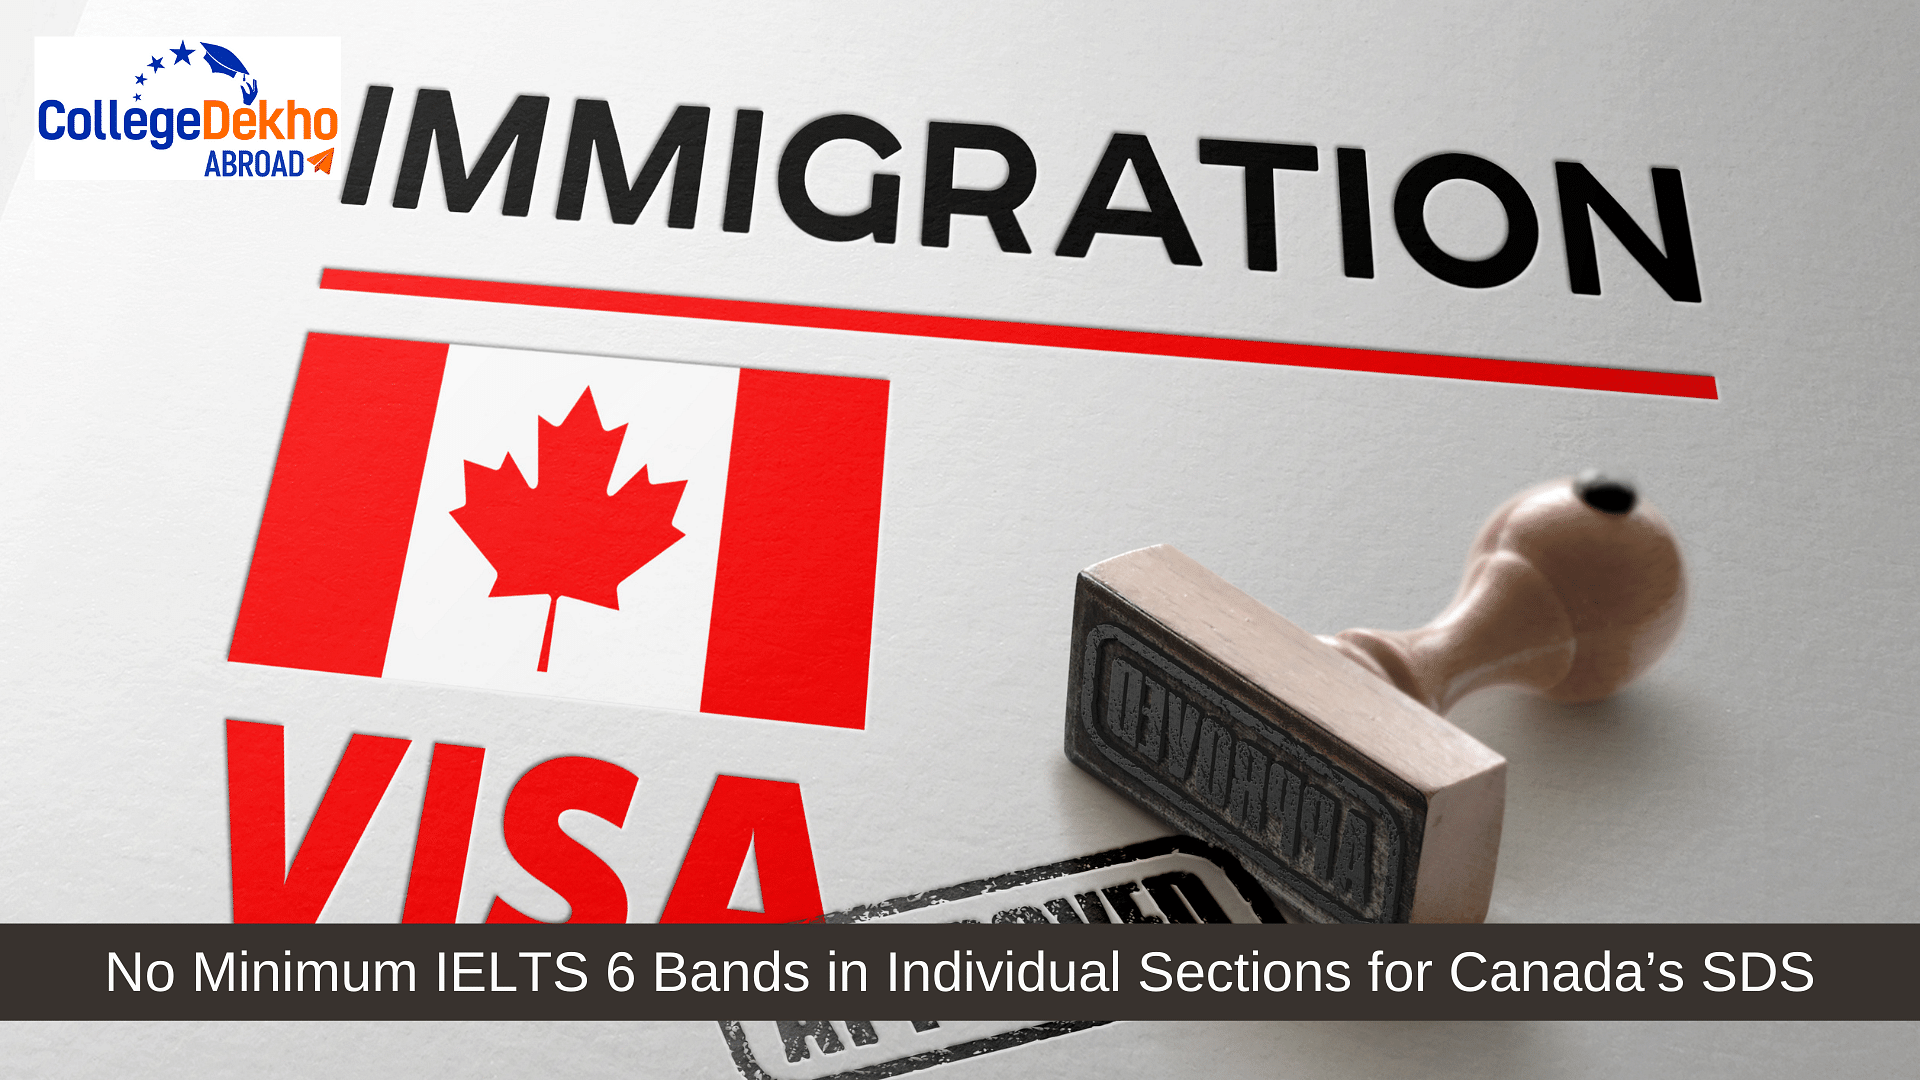 No Minimum IELTS 6 Bands in Individual Sections for Canada’s SDS